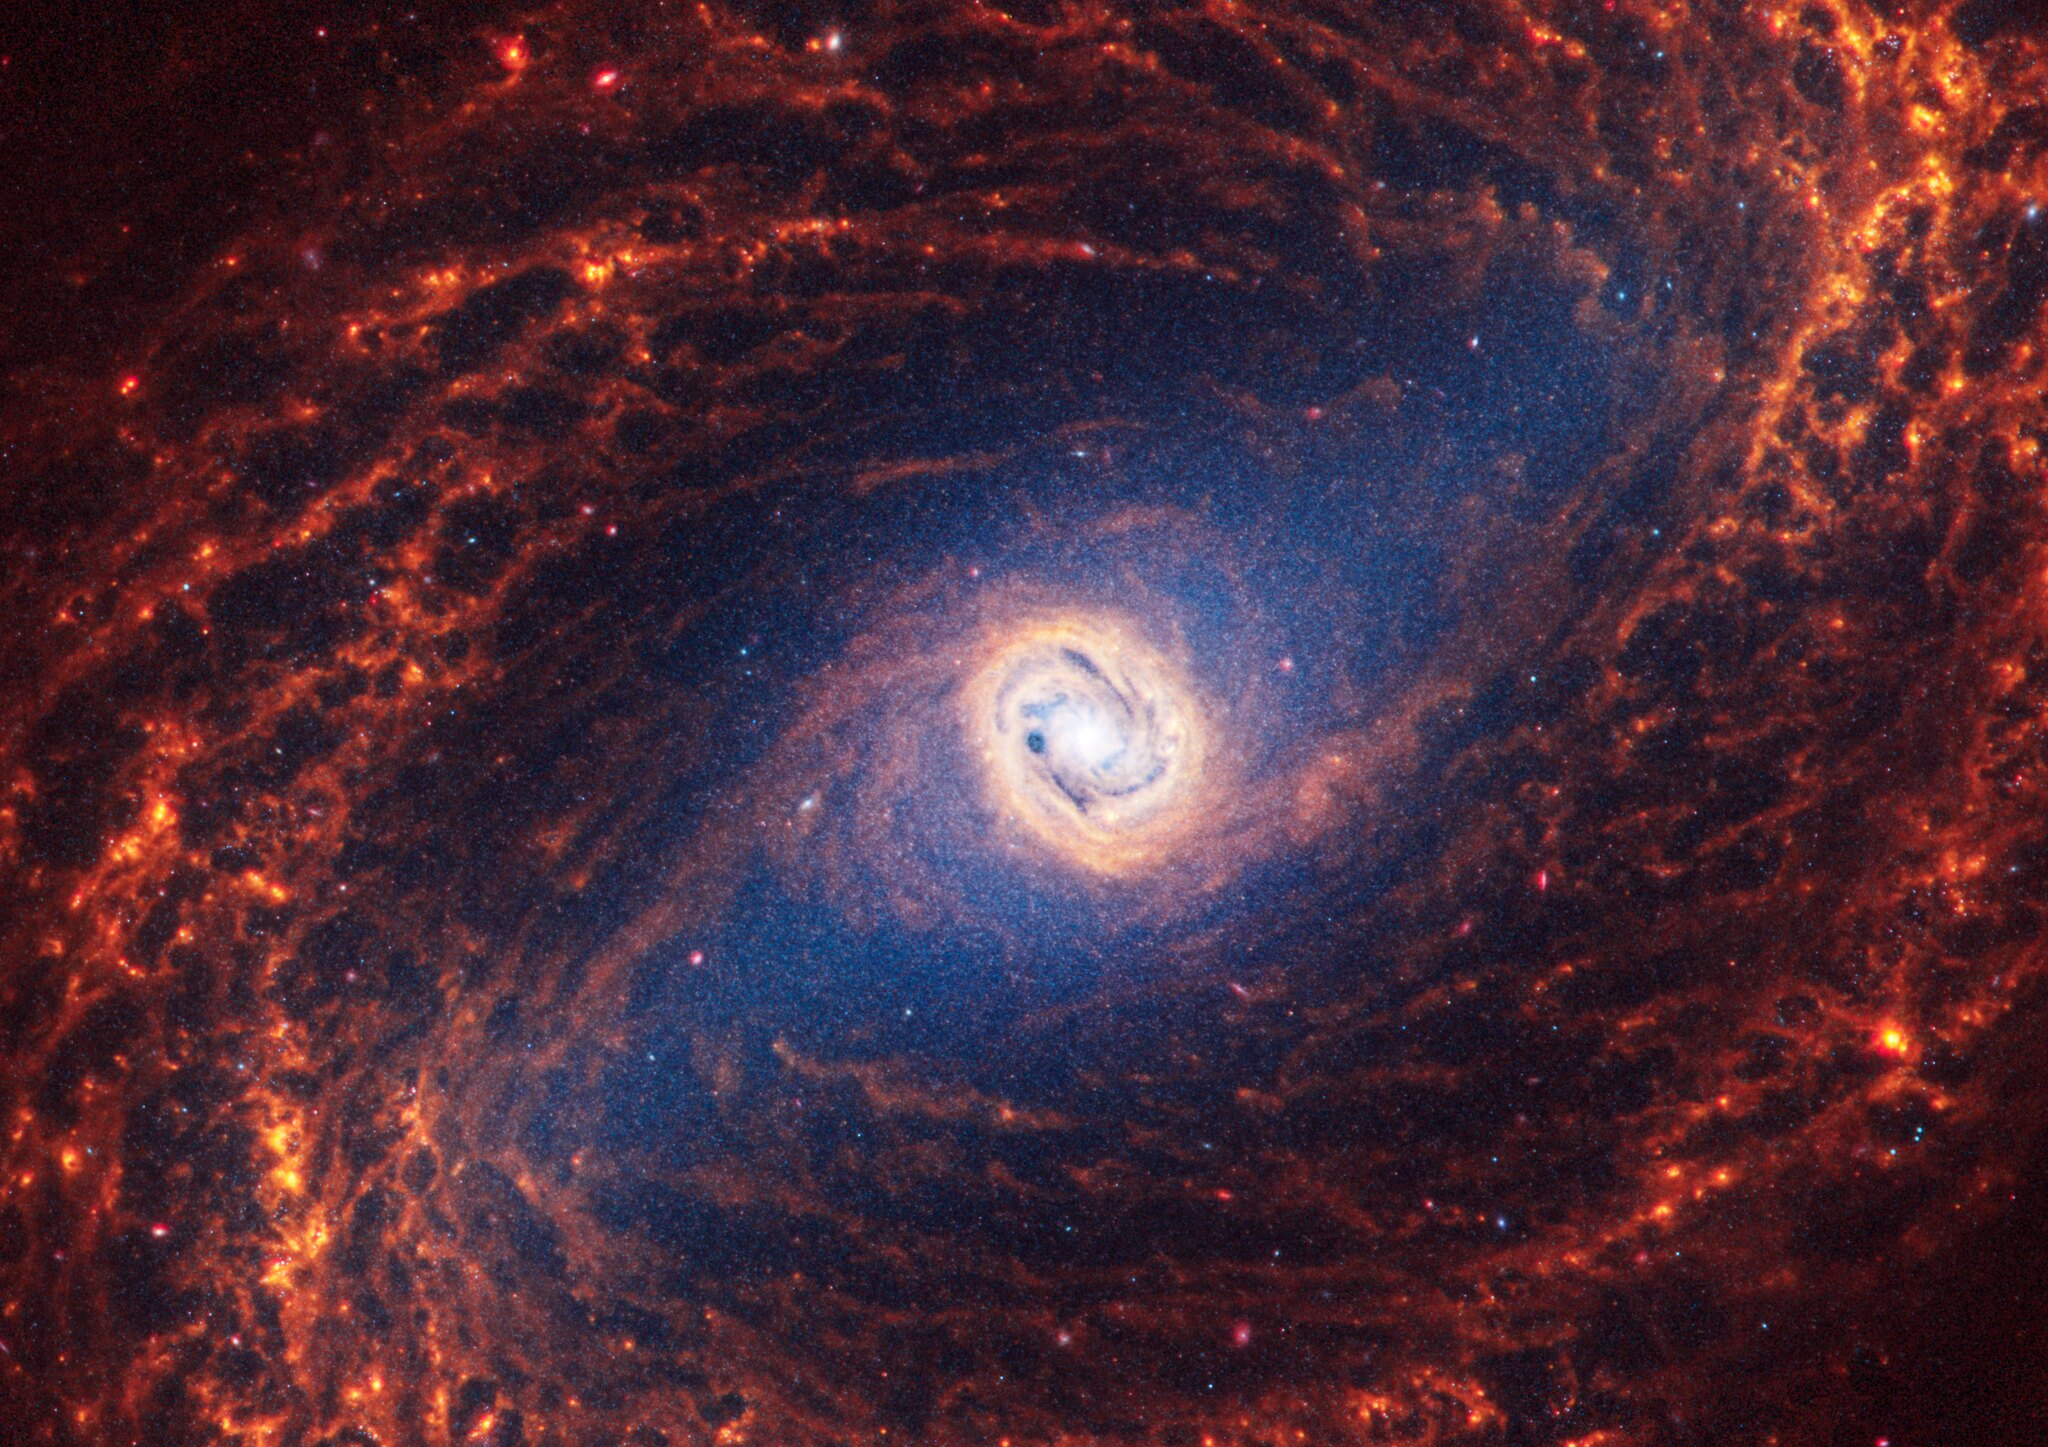 In Webb’s image, the spiral arms are composed of many filaments in shades of orange. Thin dust lanes connect from the core, through the bar to the spiral arms.